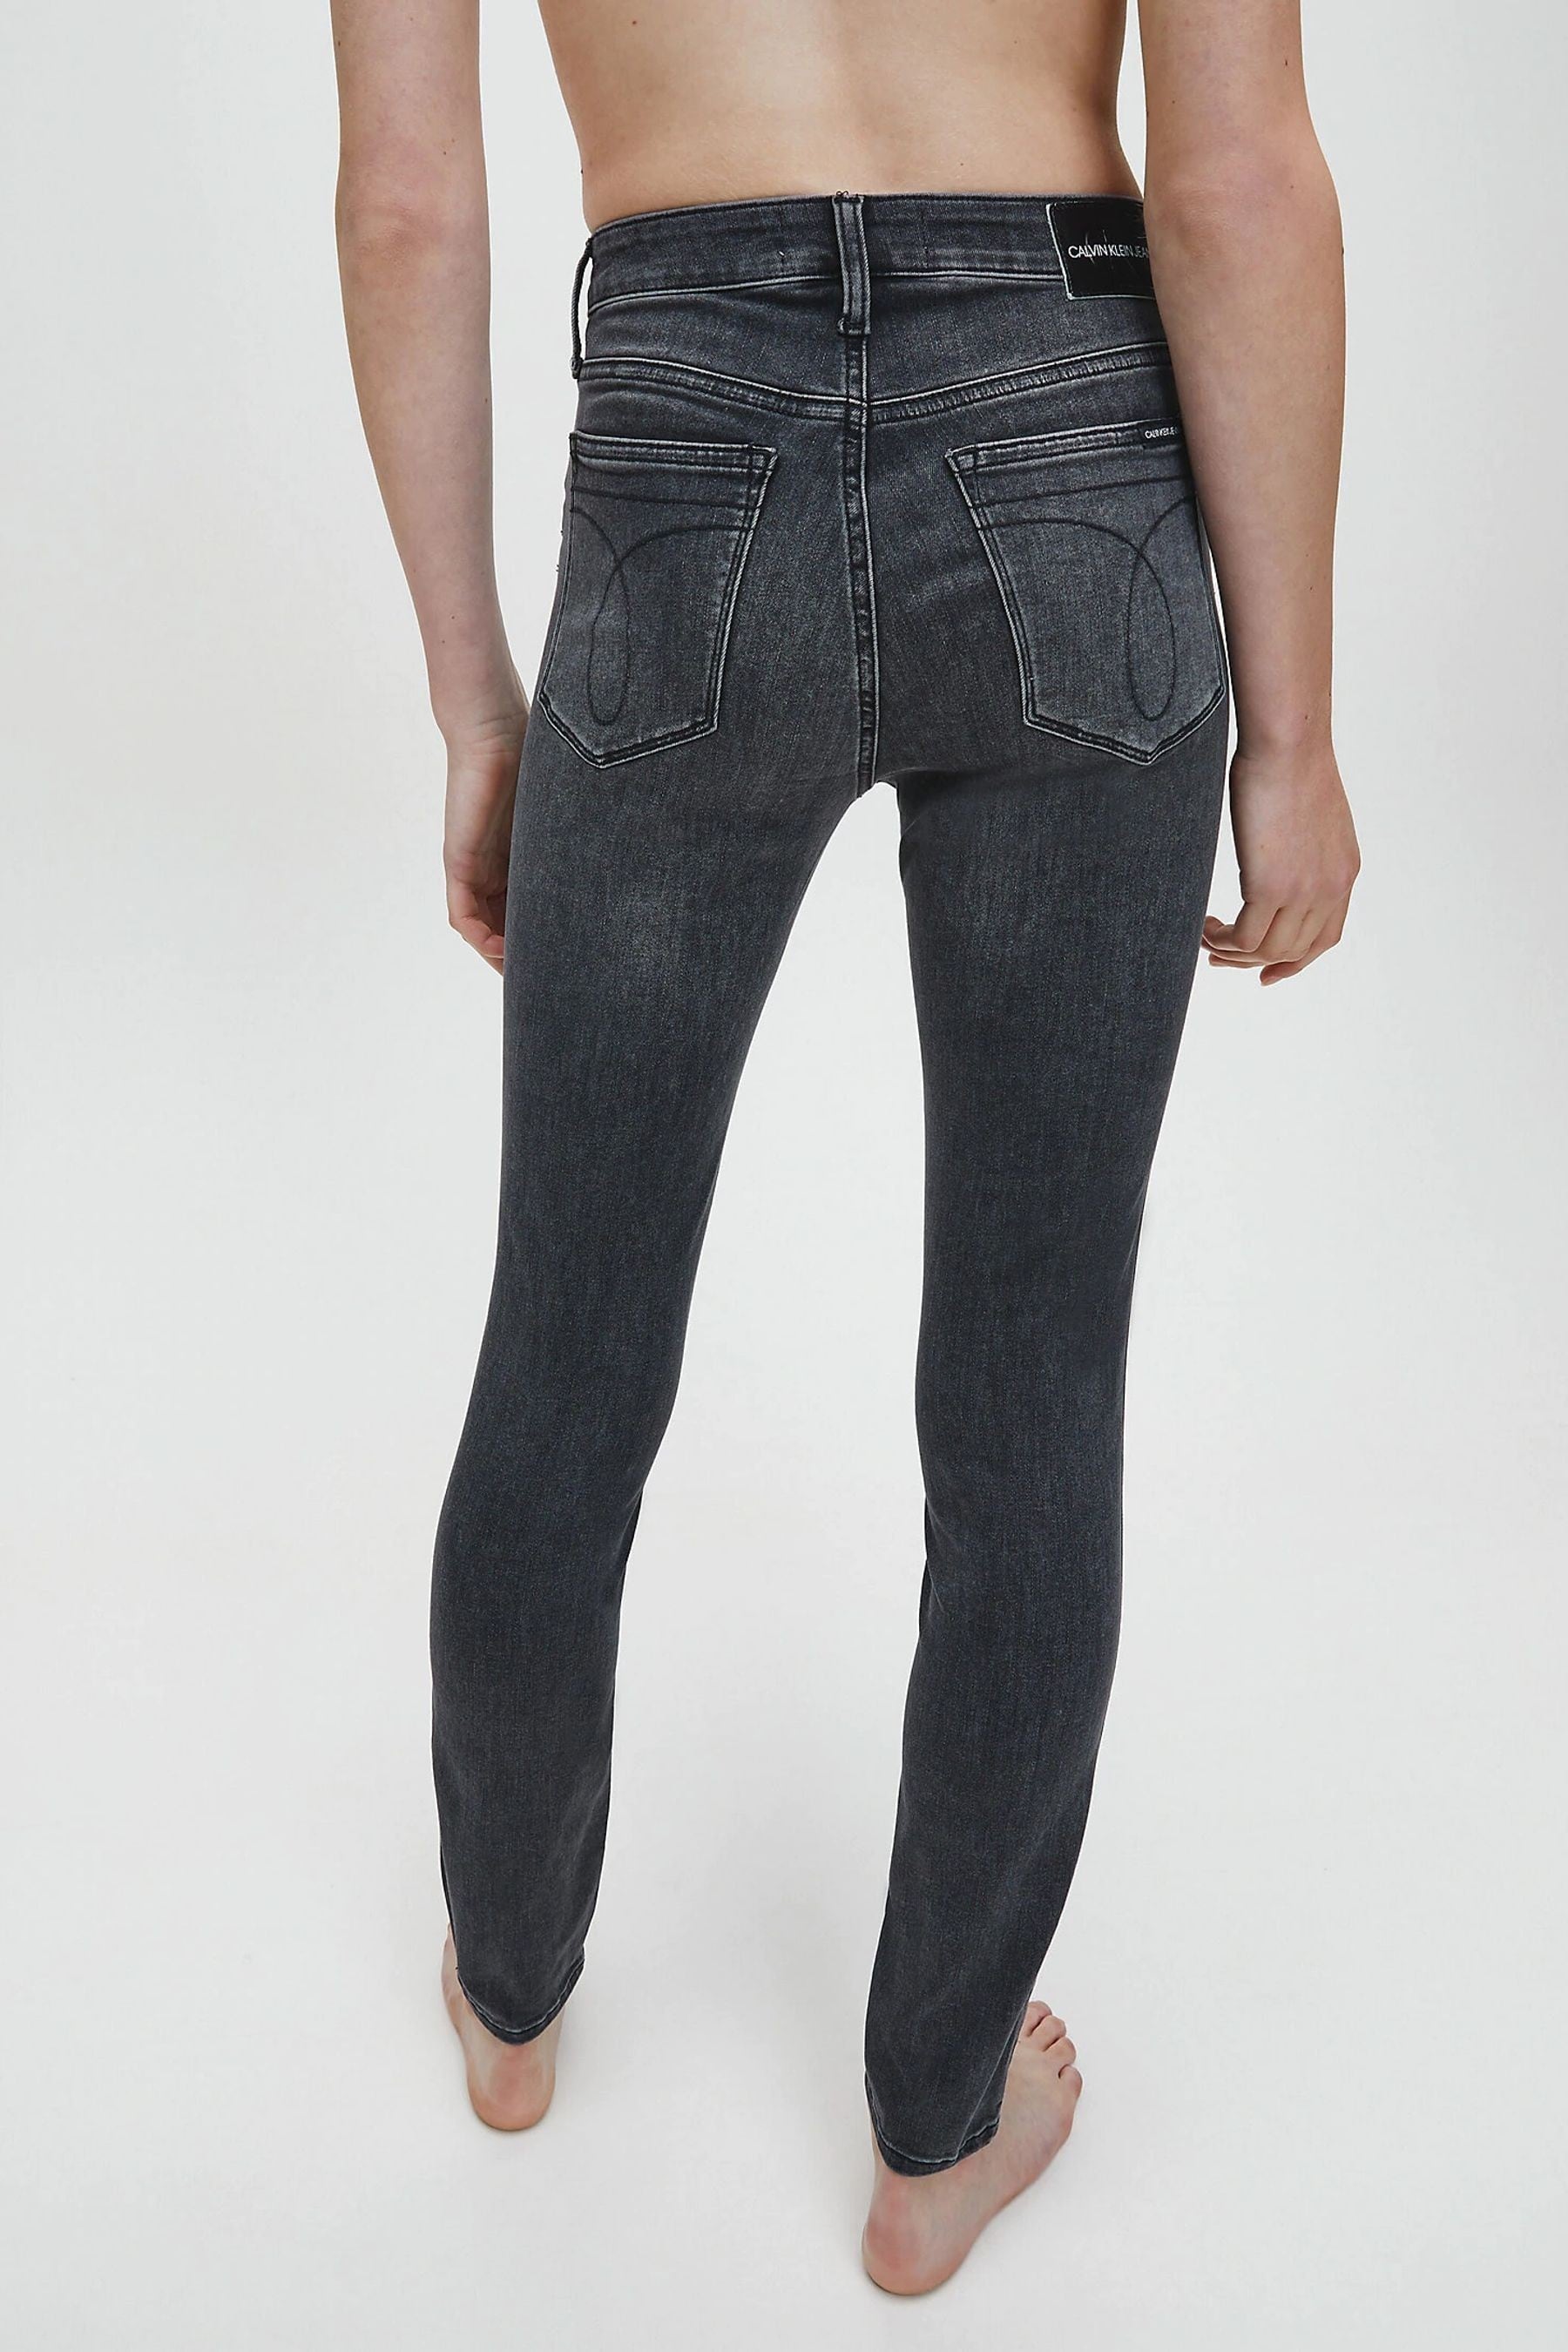 Buy Calvin Klein Jeans Grey Ckj 010 High Rise Skinny Jeans from the